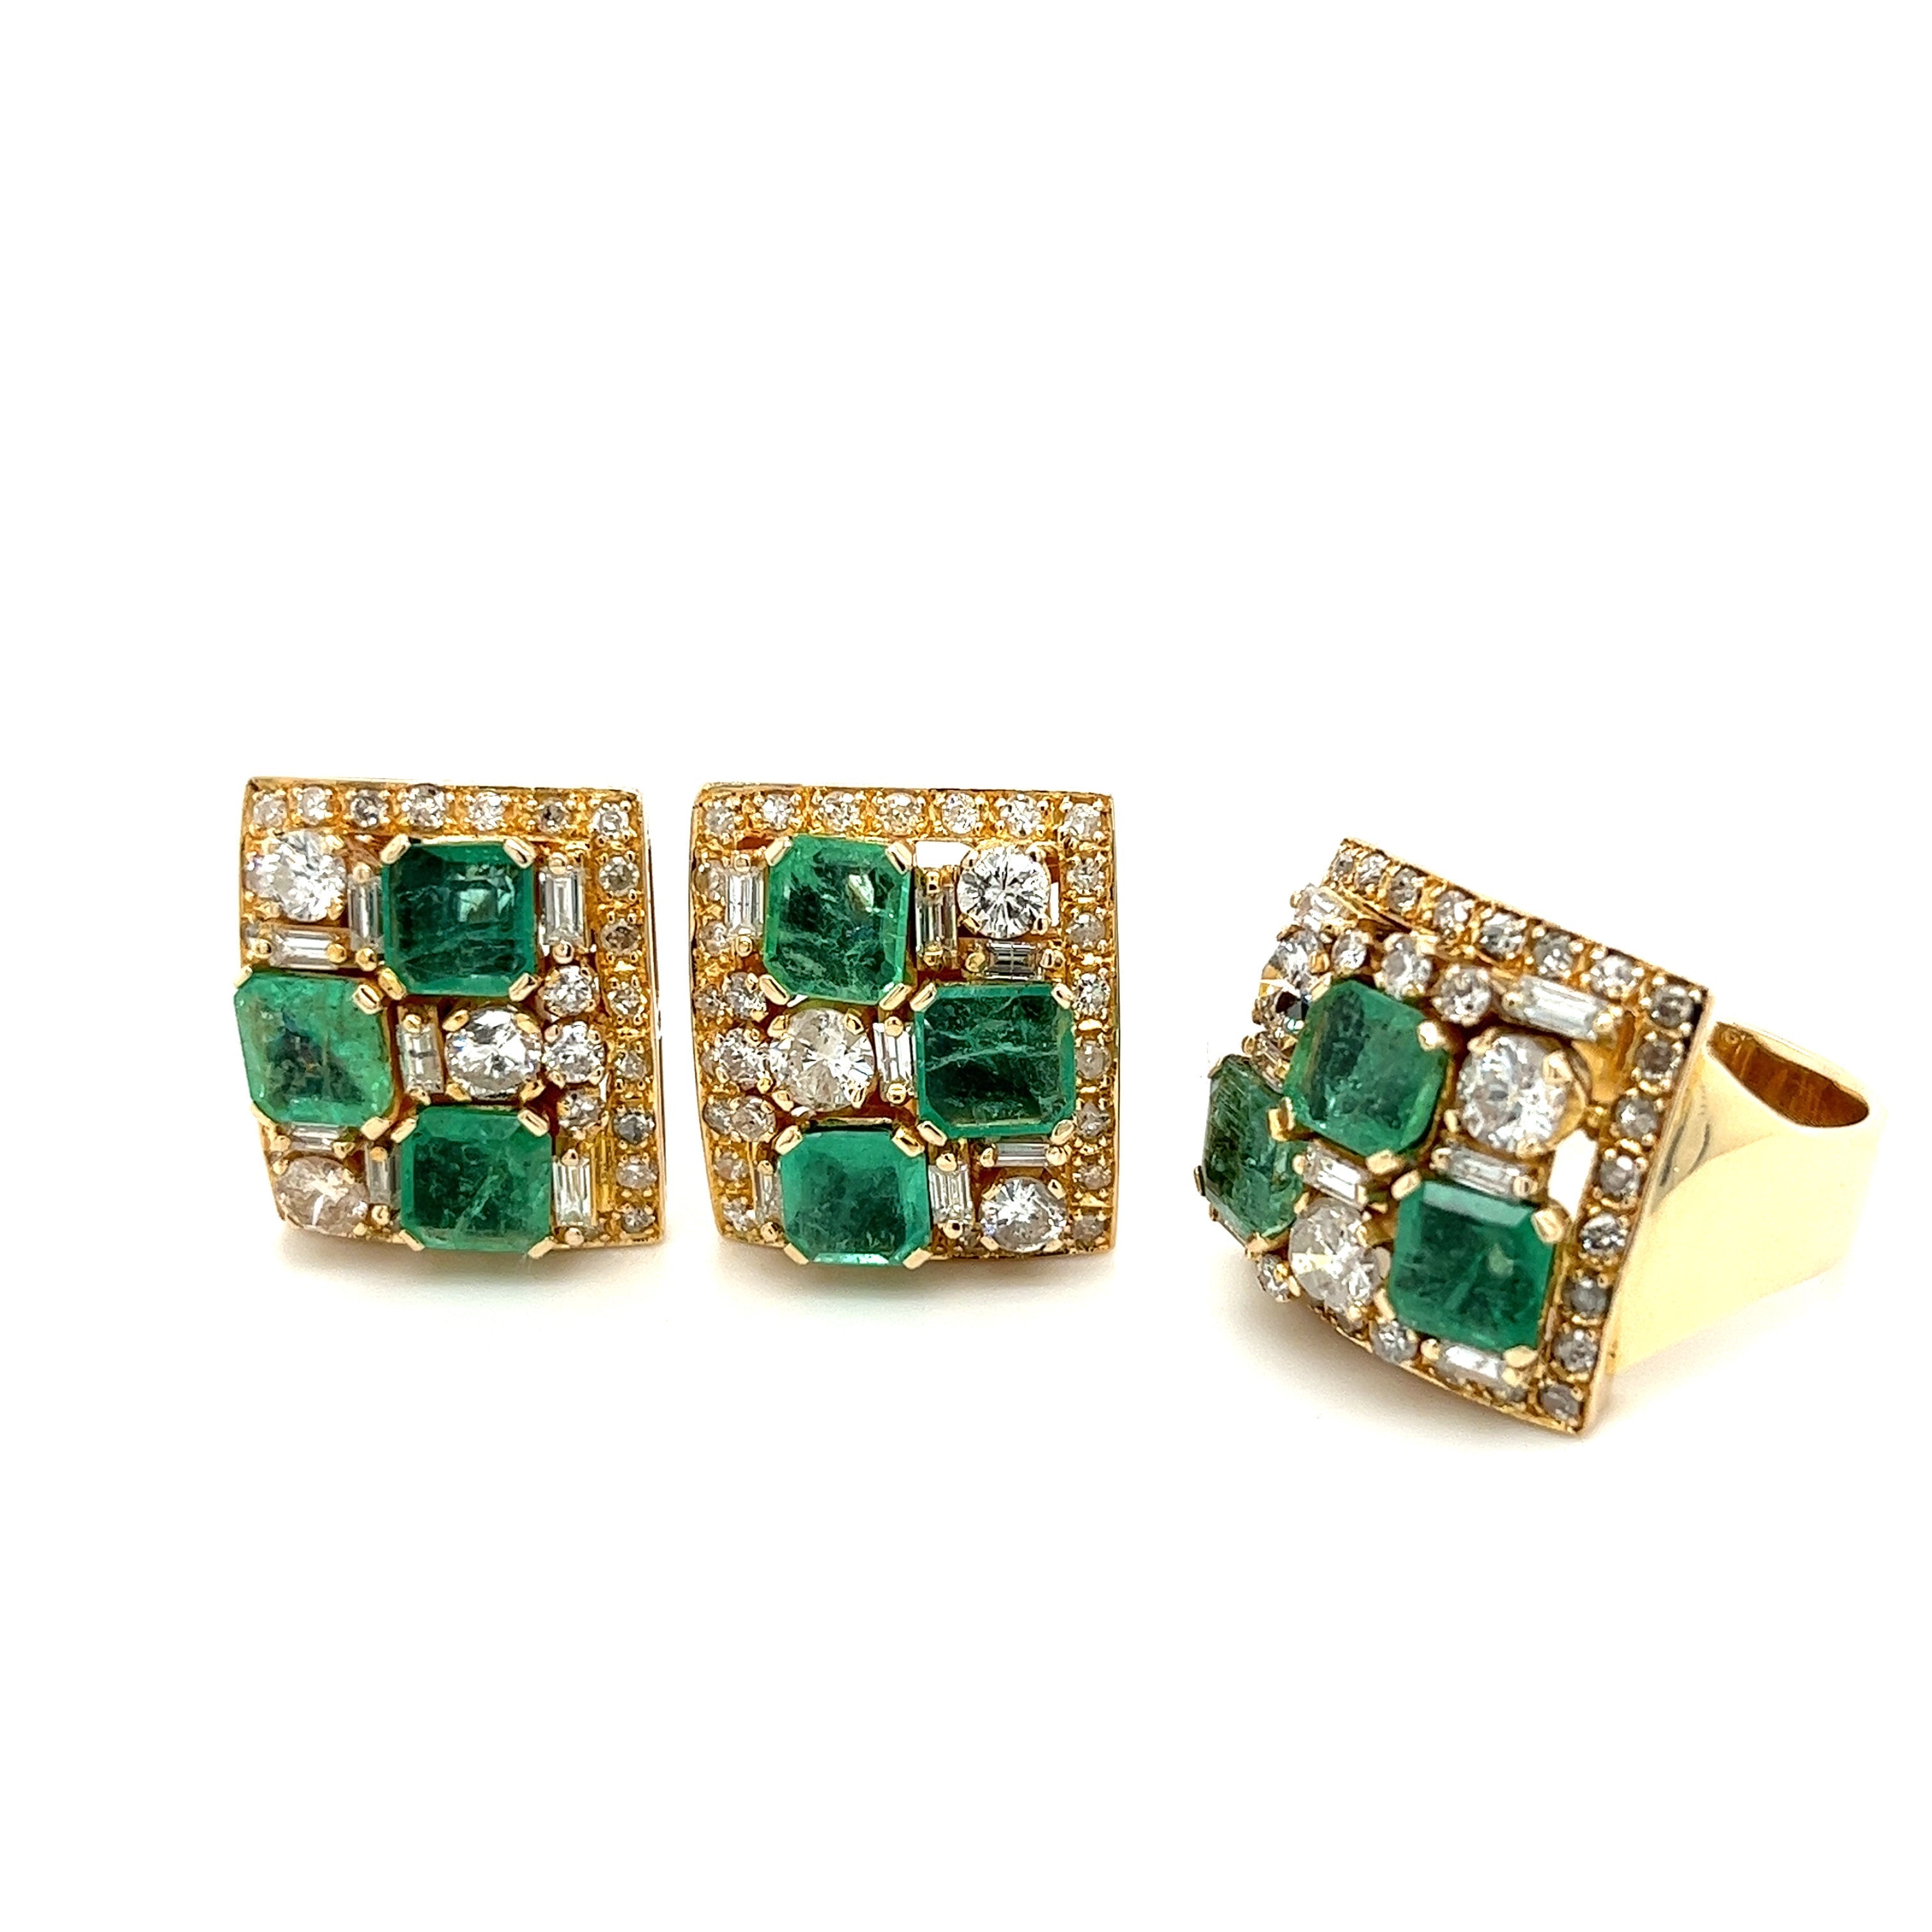 Vintage Natural Emerald & Diamond Earring and Ring Jewelry Set in 18K Gold-Jewelery Sets-ASSAY